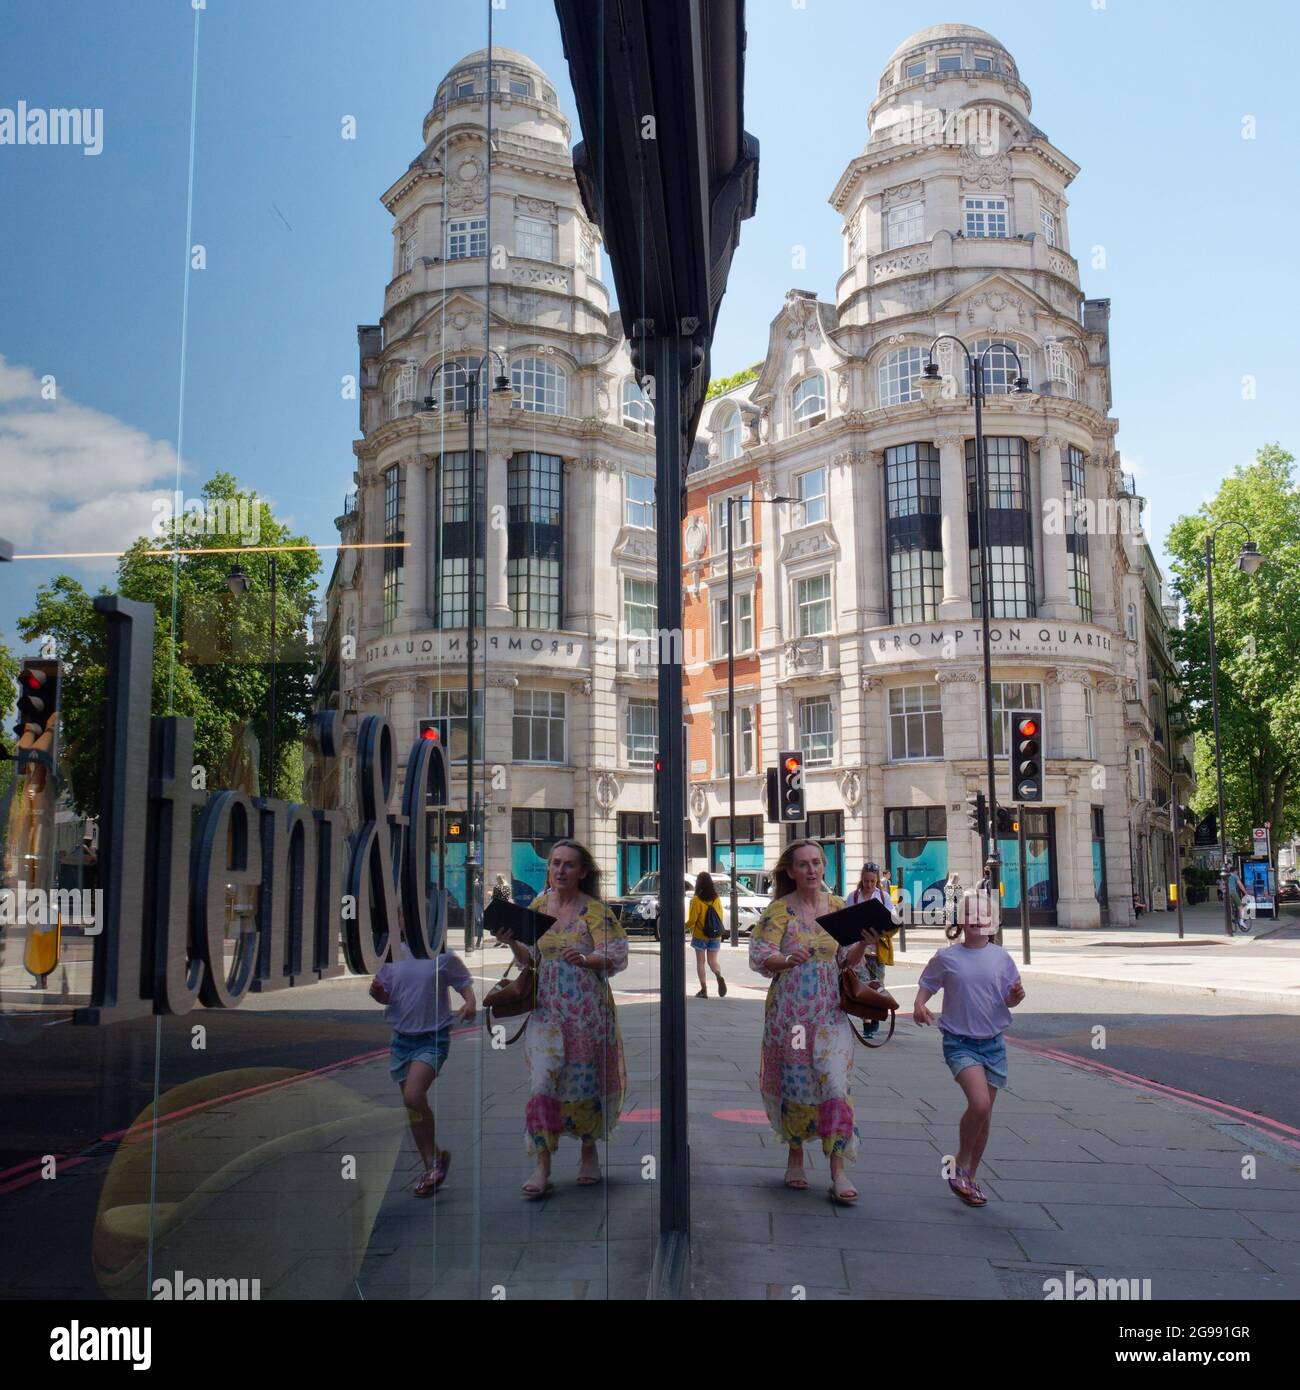 London, Greater London, England, June 12 2021: Mirror image reflection of Brompton Quarter Empire House with mother and  running in foreground. Stock Photo